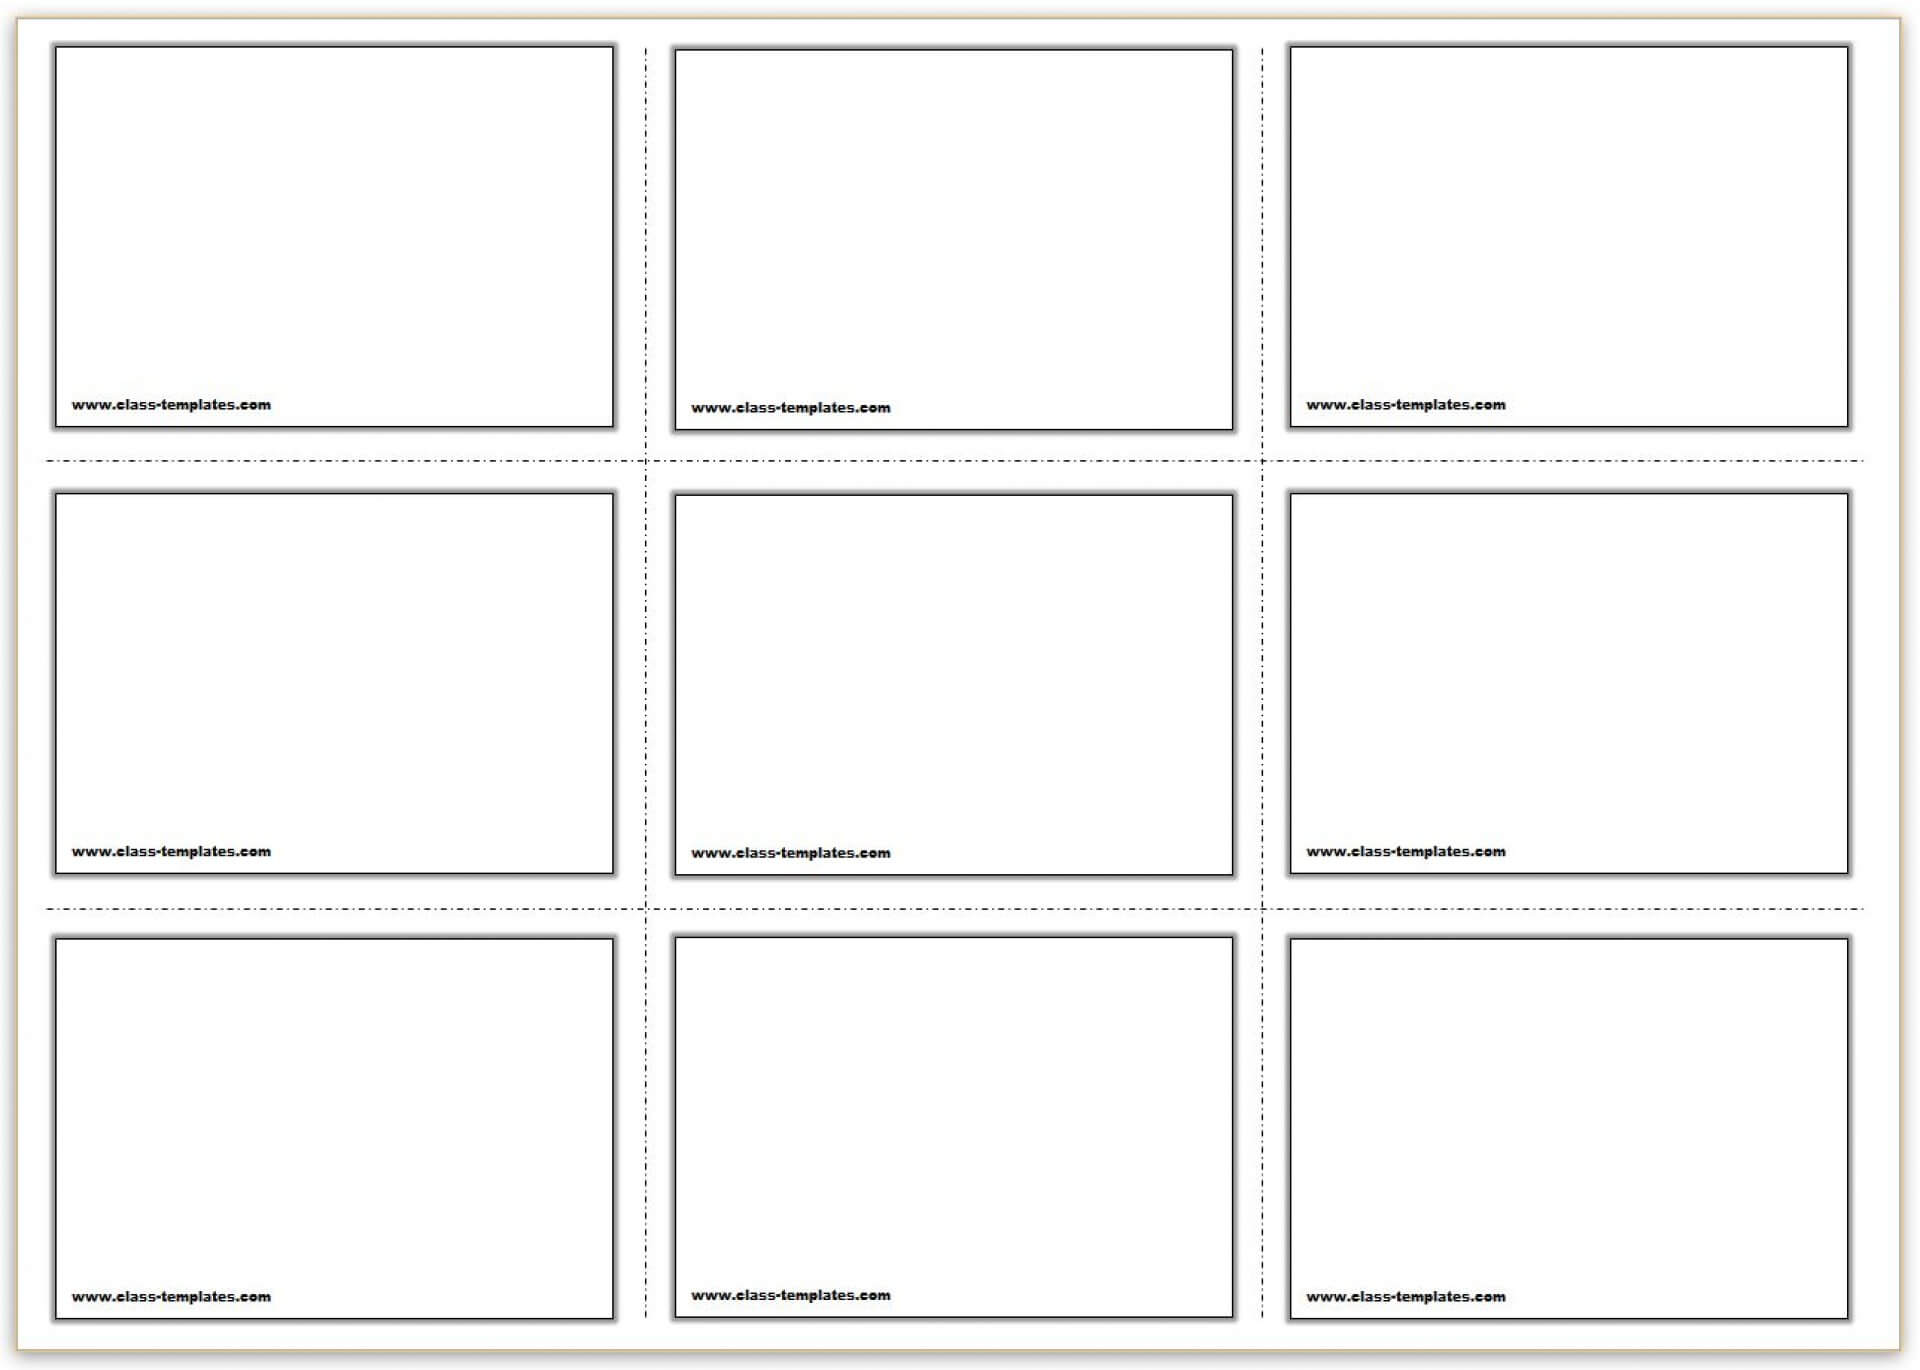 002 Printable Flash Cards Template 3X3 Ideas Free Card Intended For Free Printable Blank Flash Cards Template